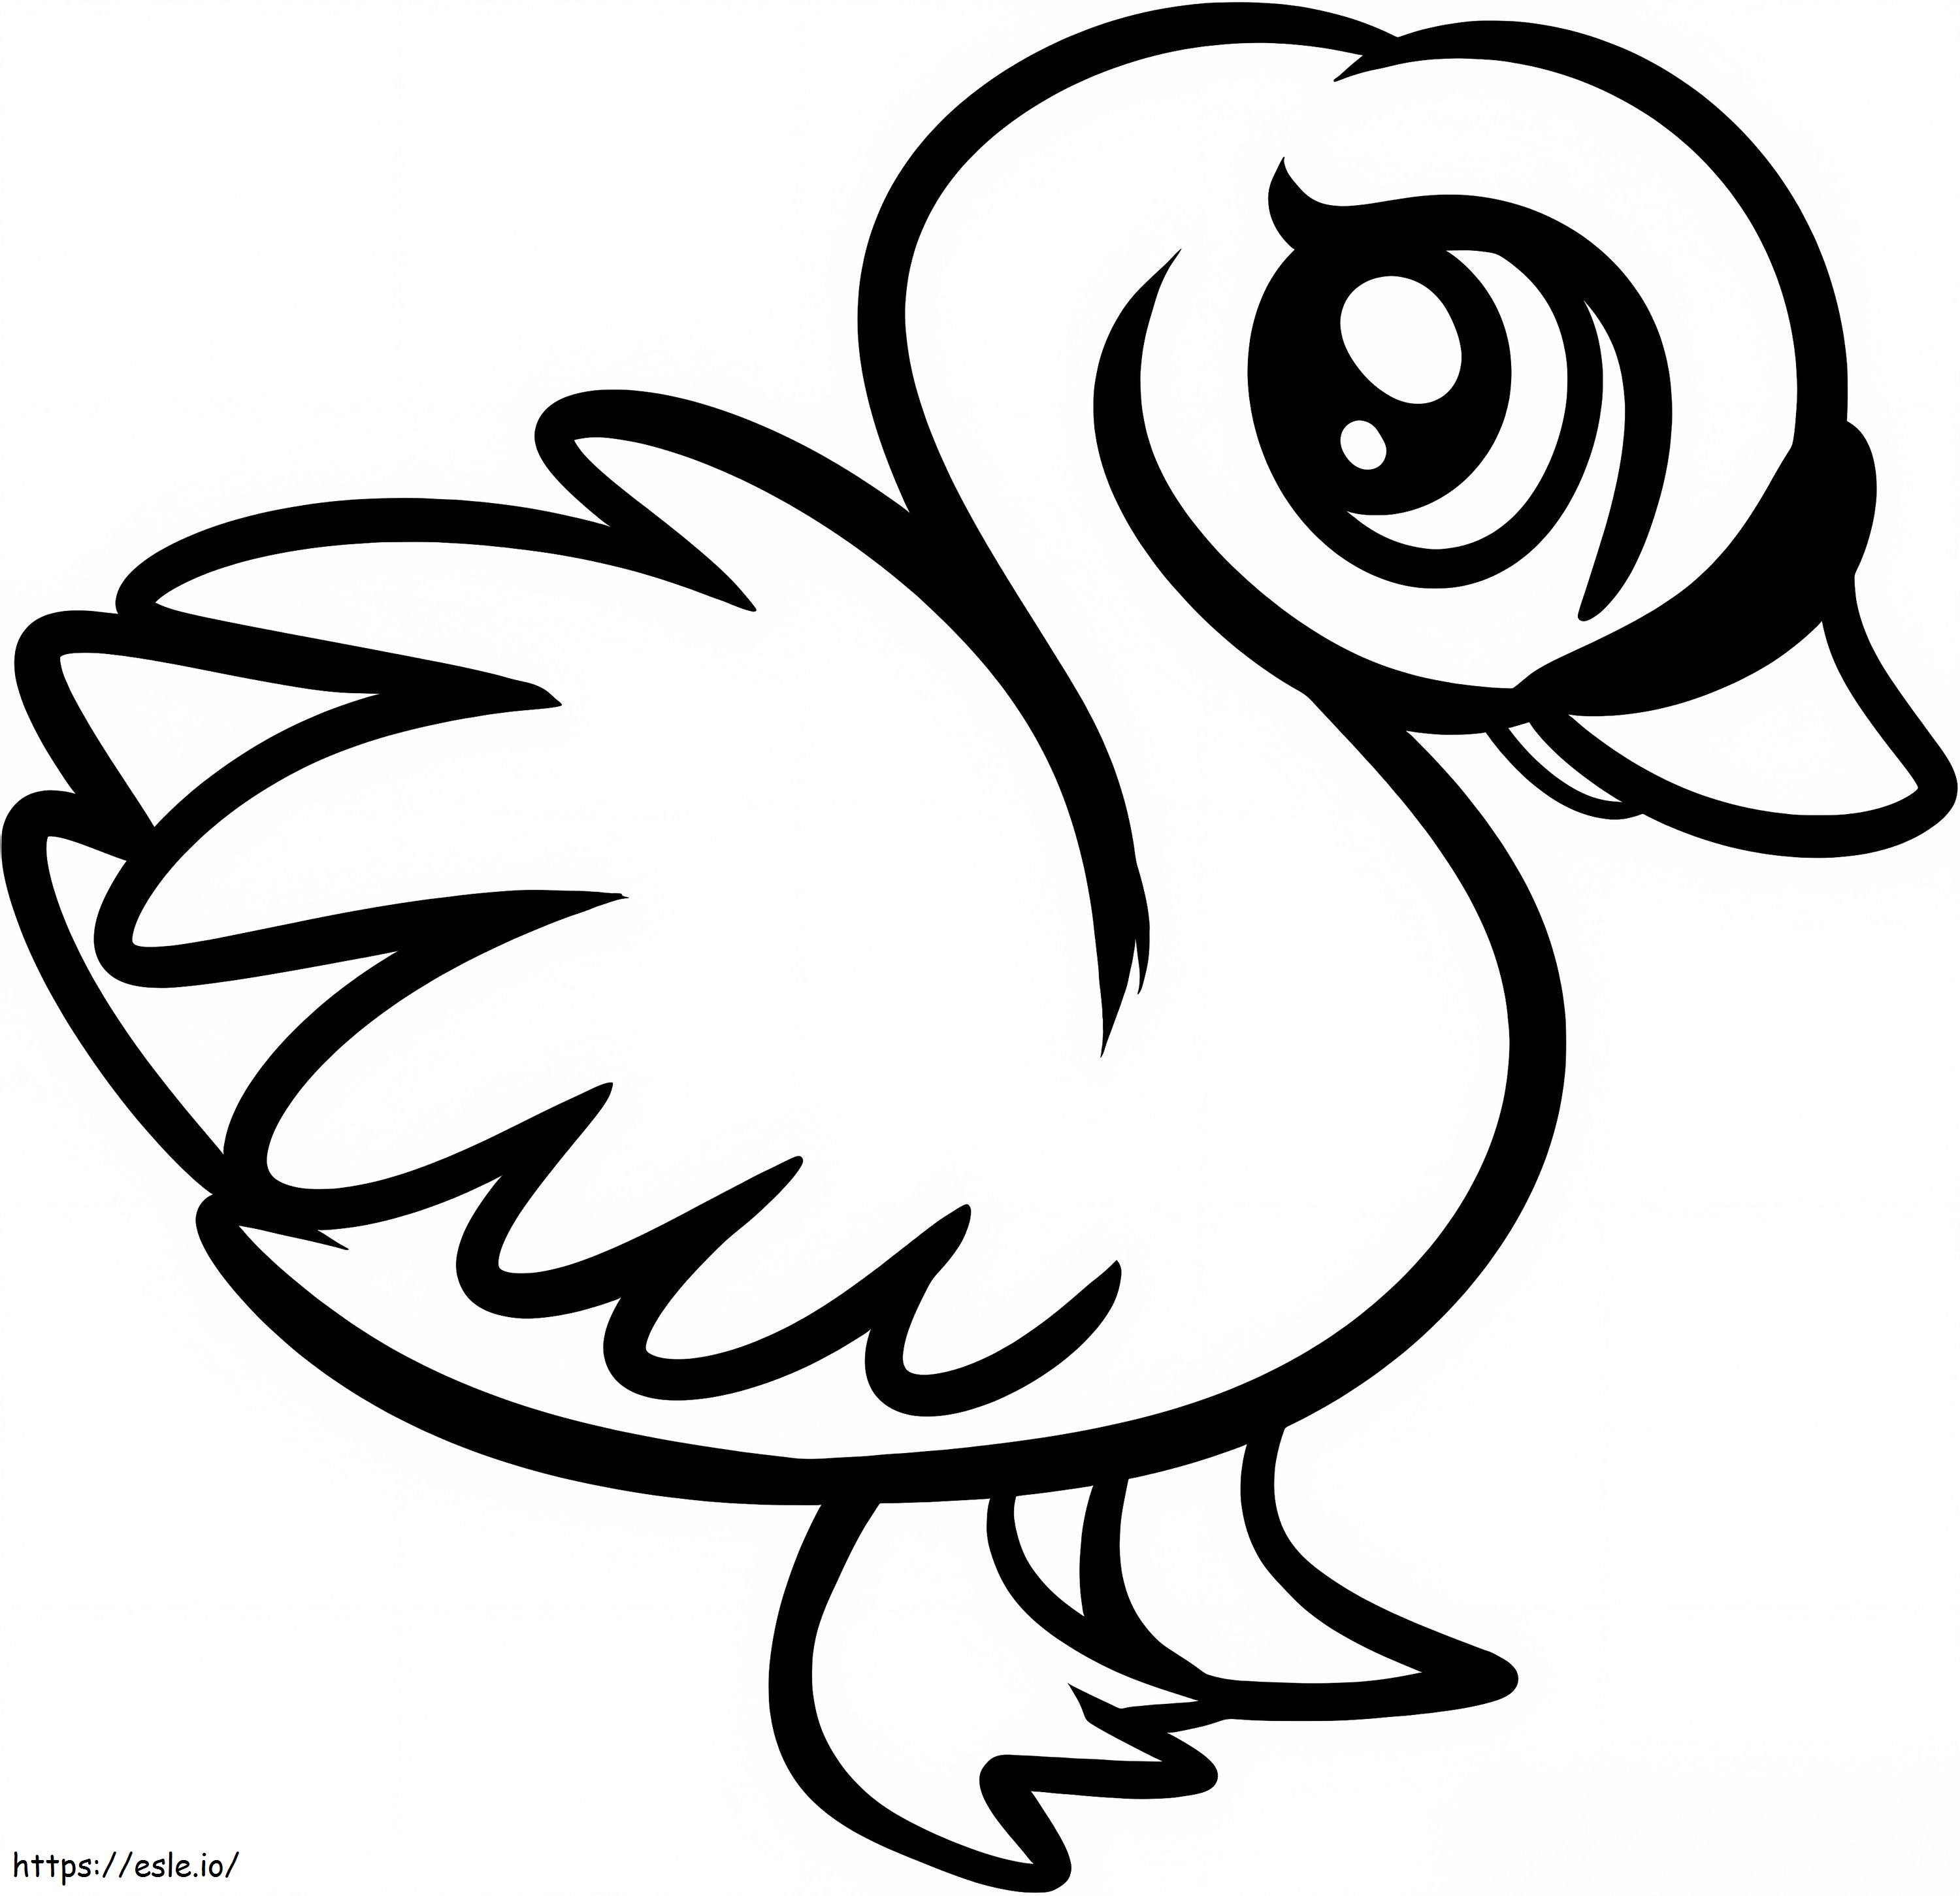 1560324624 Cute Swan A4 coloring page